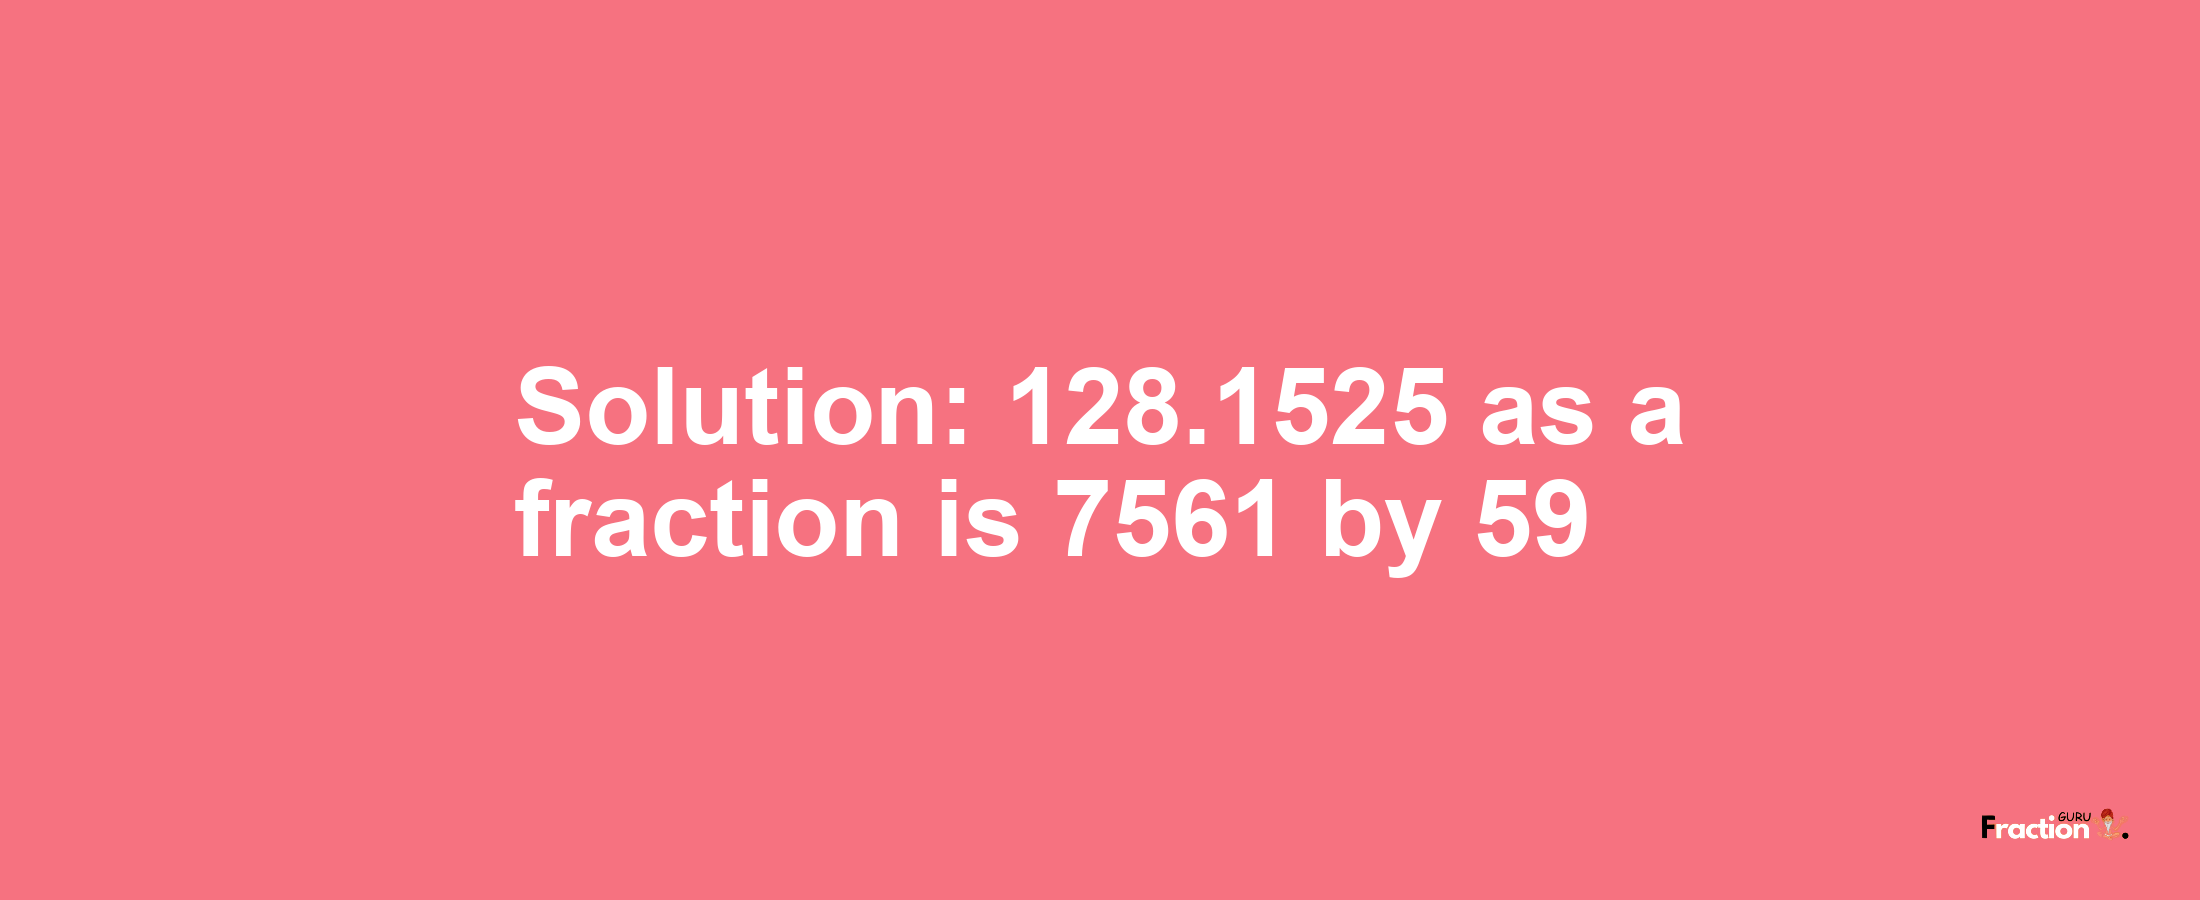 Solution:128.1525 as a fraction is 7561/59